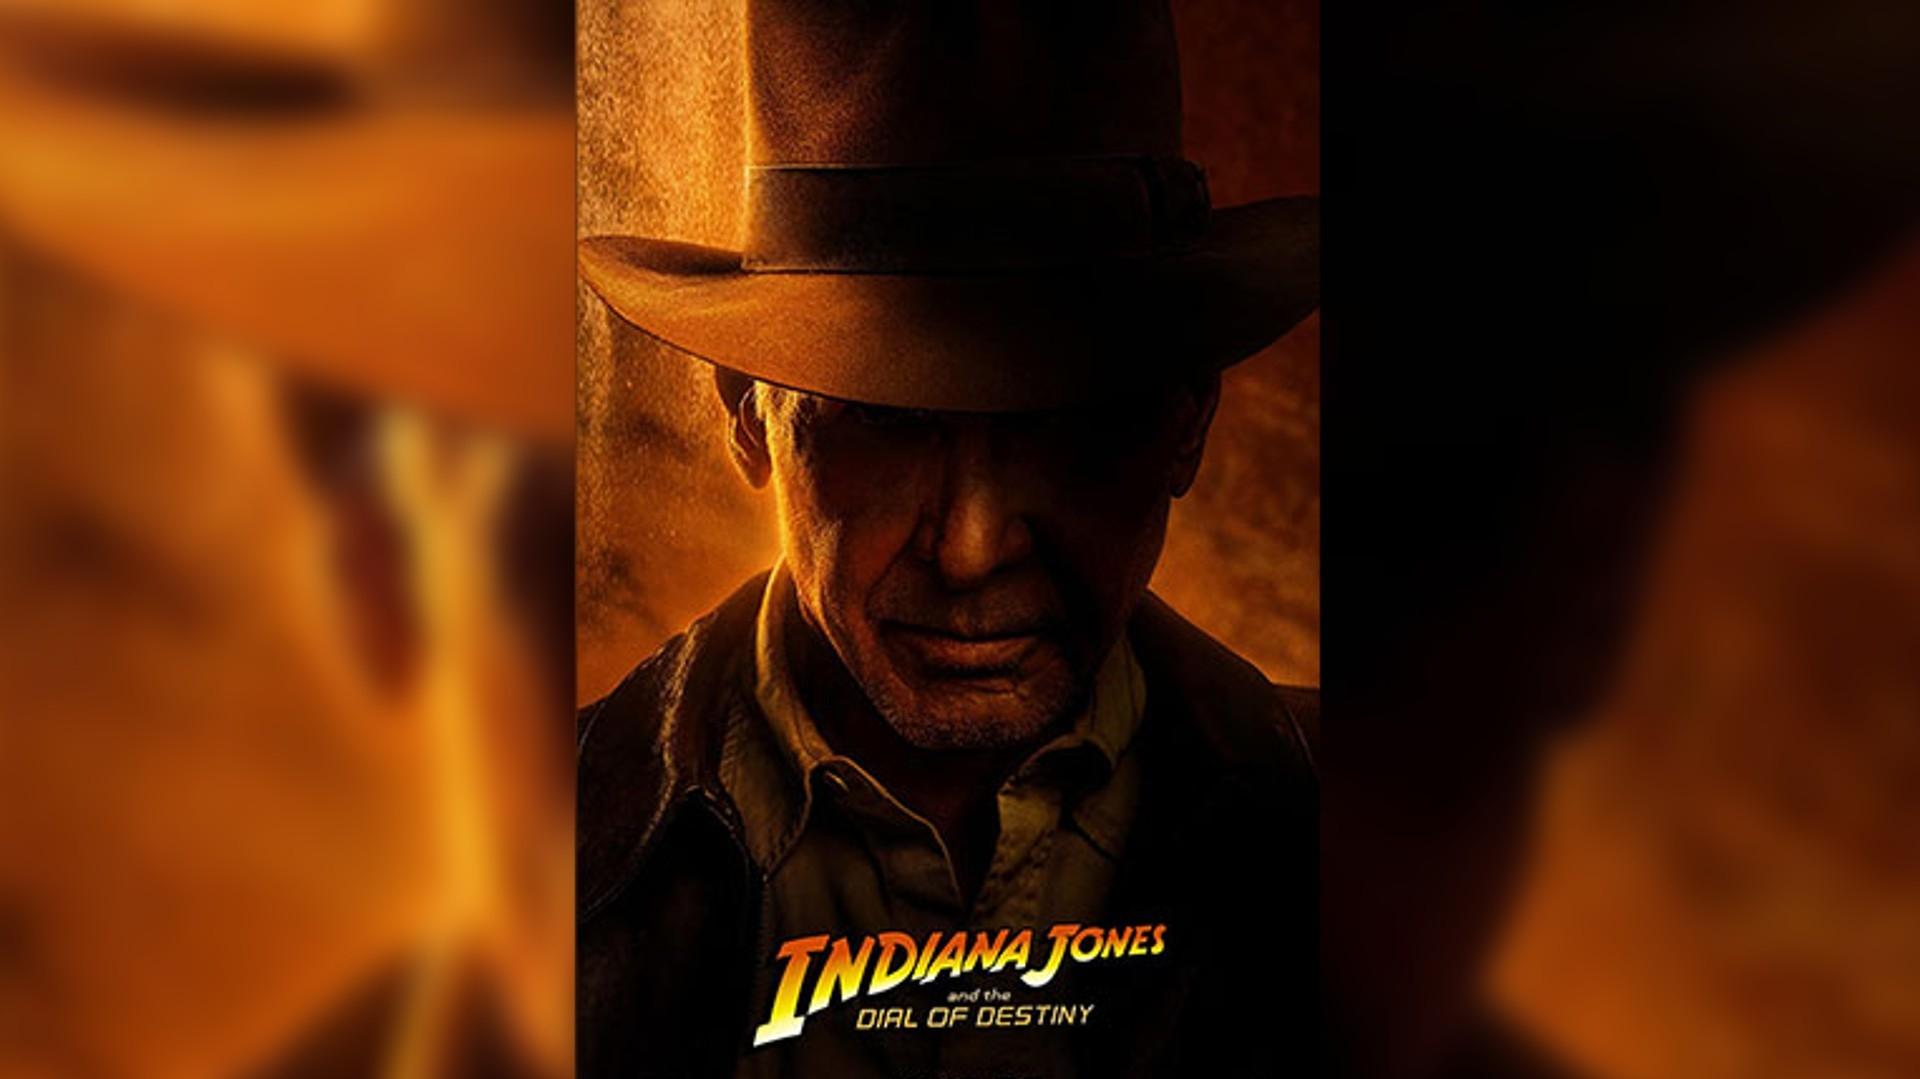 Harrison Ford S Indiana Jones And The Dial Of Destiny New Trailer Out